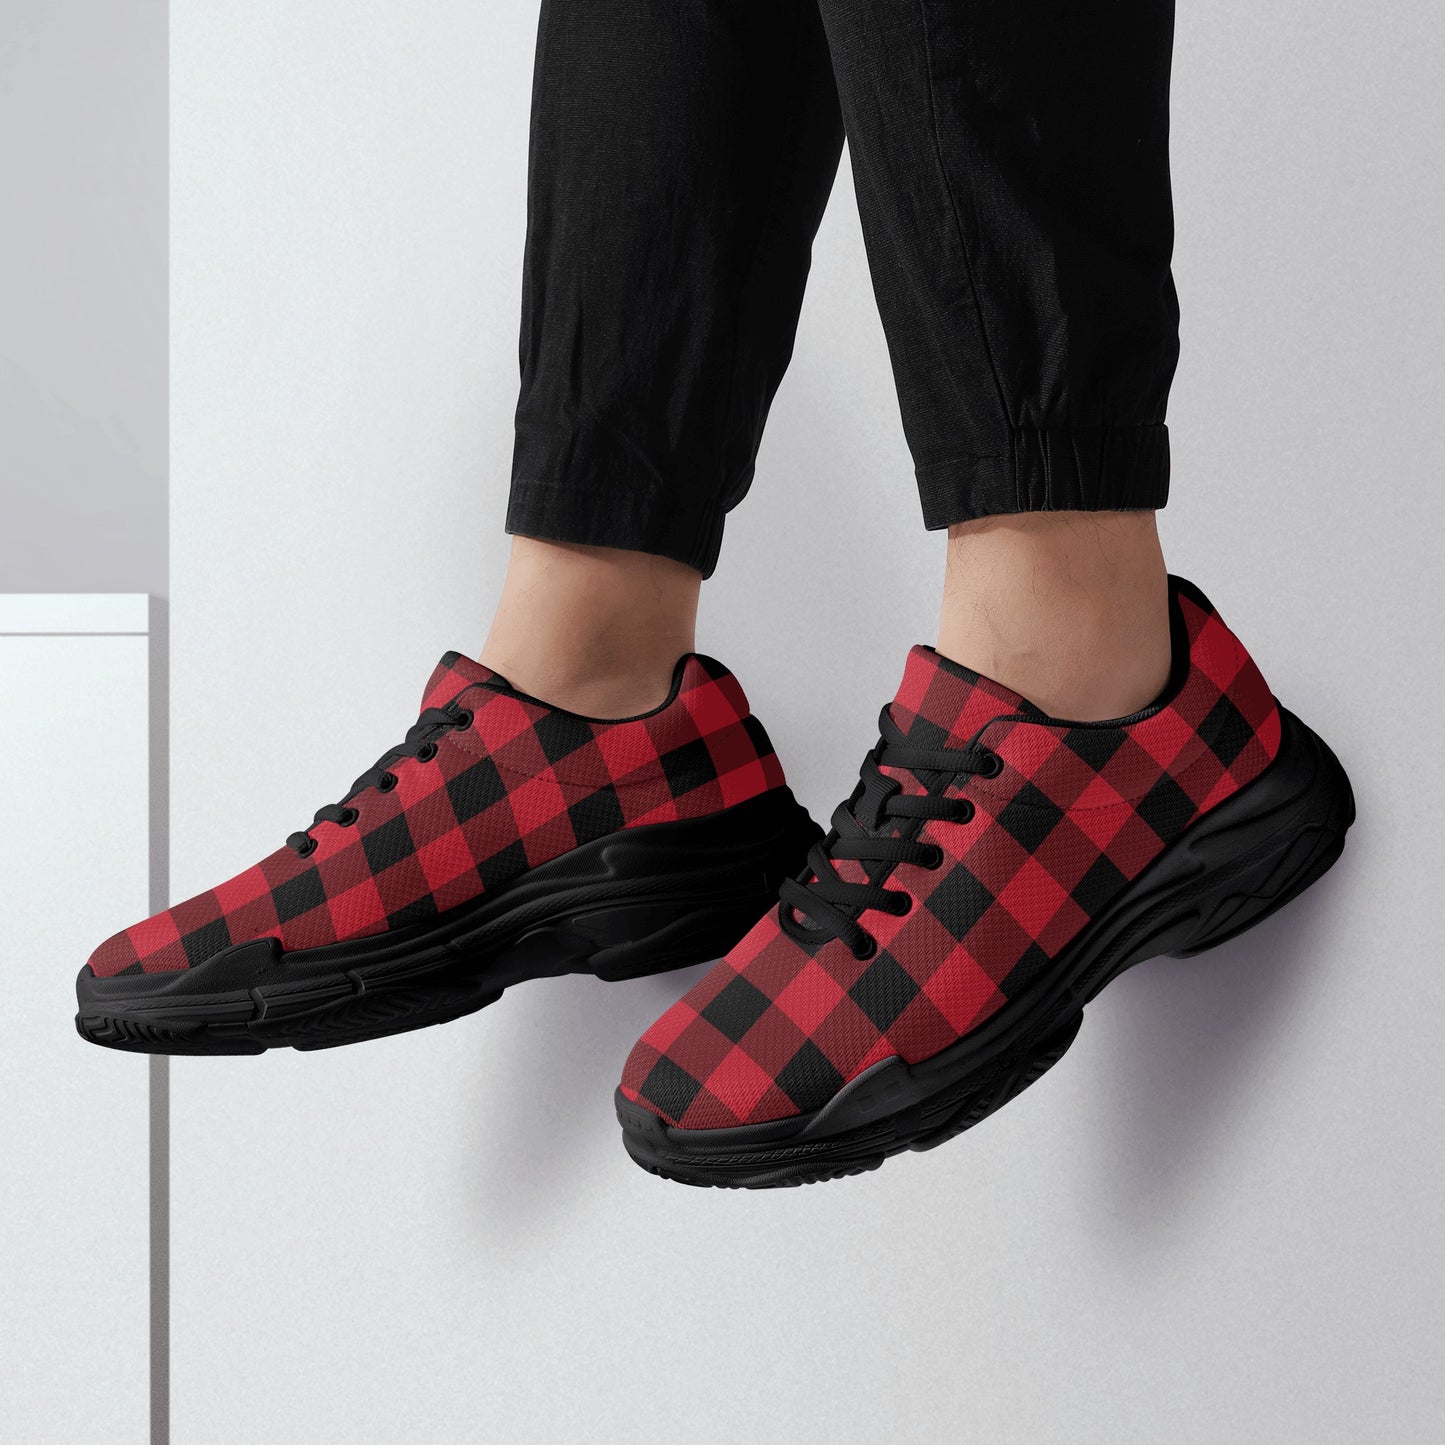 Red Buffalo Plaid Men's Chunky Shoes, Black Checkered Lace Up Exercise Unique Designer Custom Canvas Casual Streetwear Sneakers